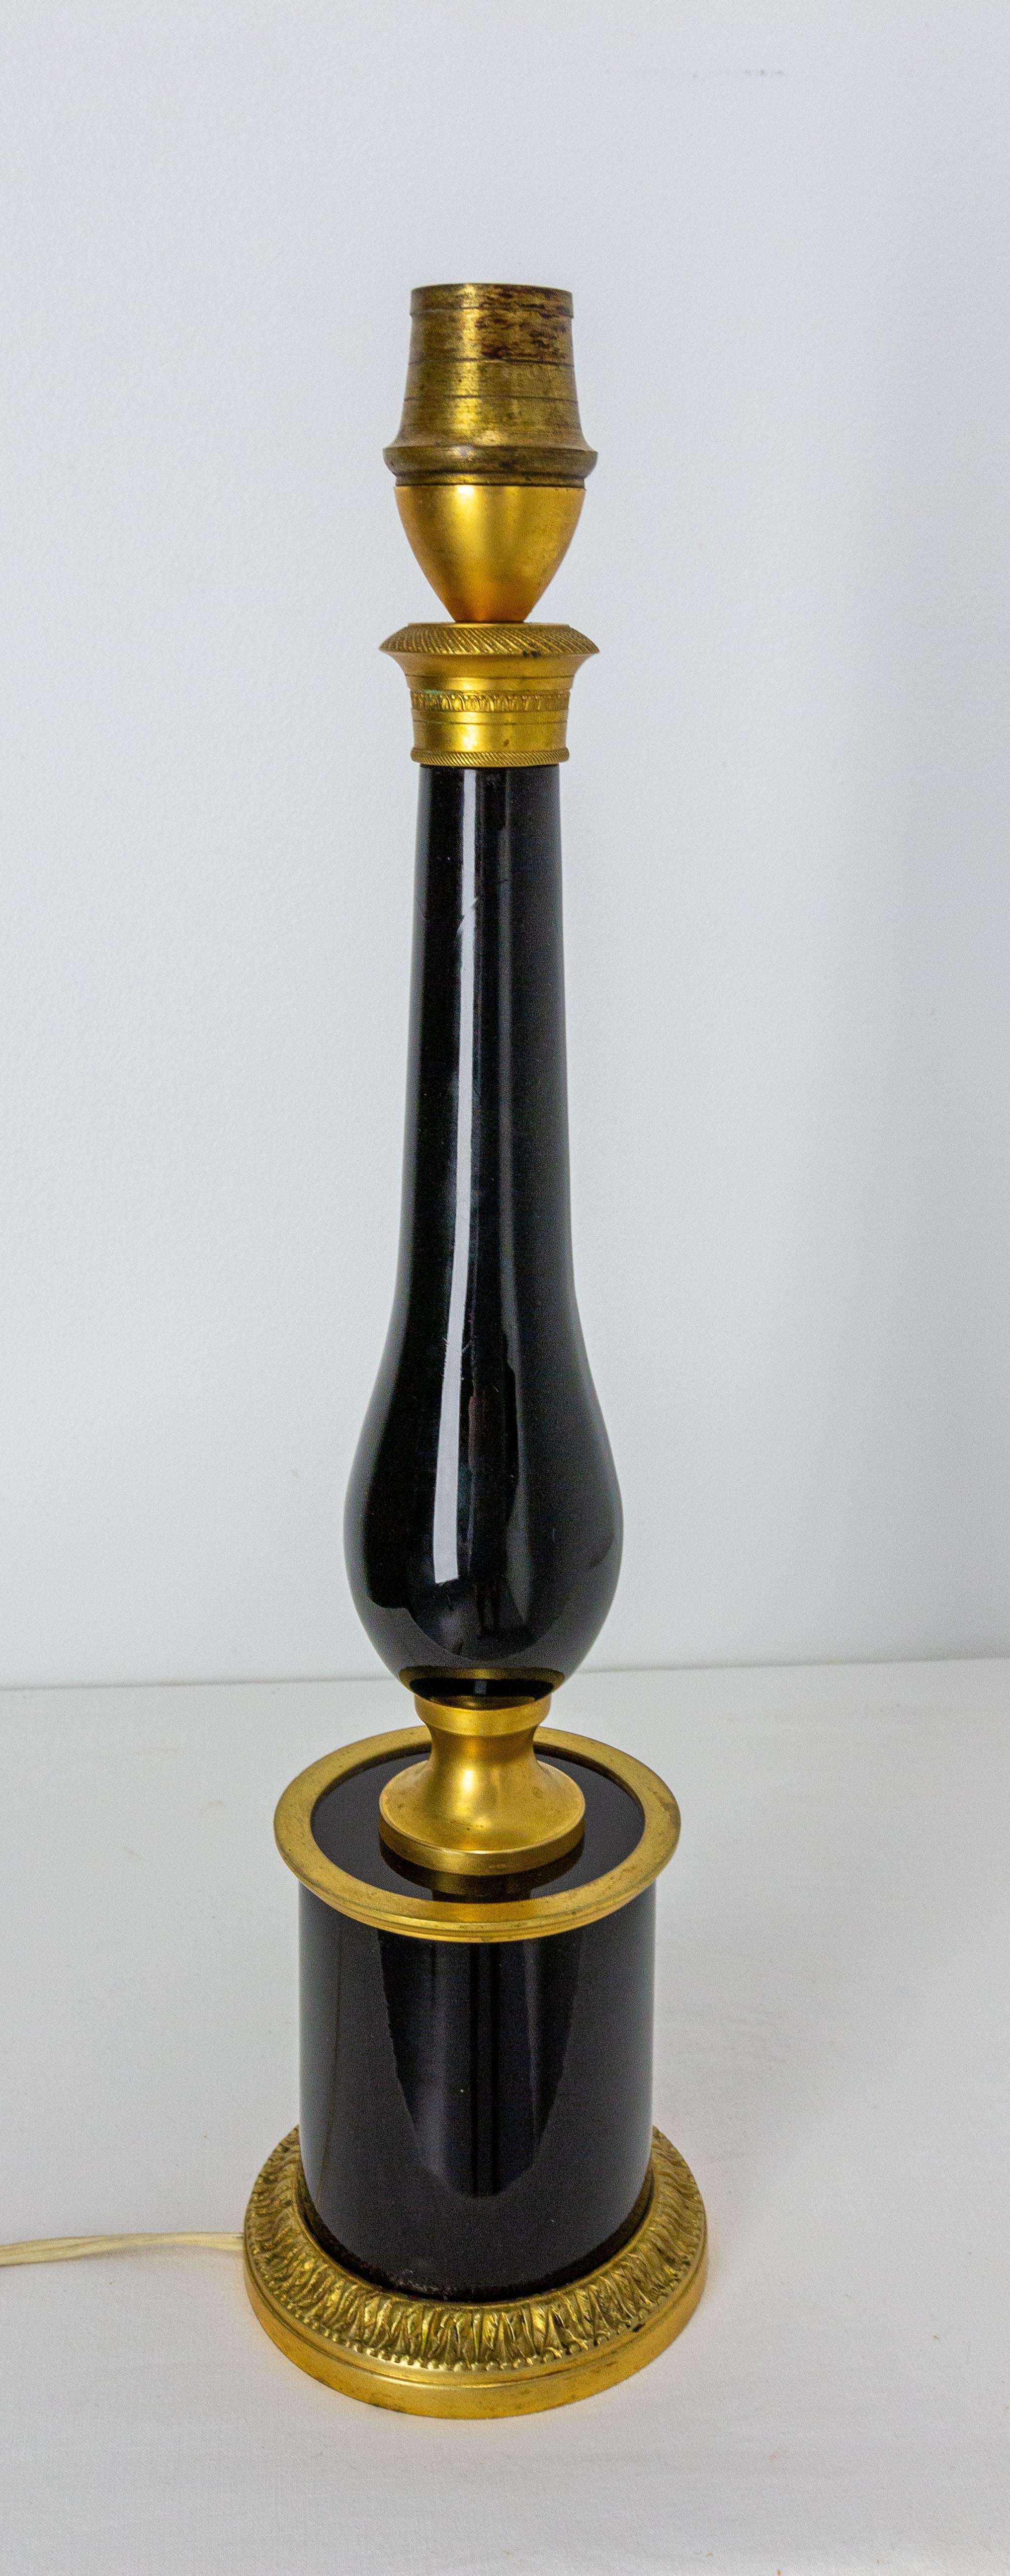 Black Glass and brass table lamp.
Elegant lamp for a dining room, a living room or an entrance, perfect to create a subdued atmosphere.
French circa 1960.
Good vintage condition. A little scratch glued at the foot of the lamp.
Height dimension